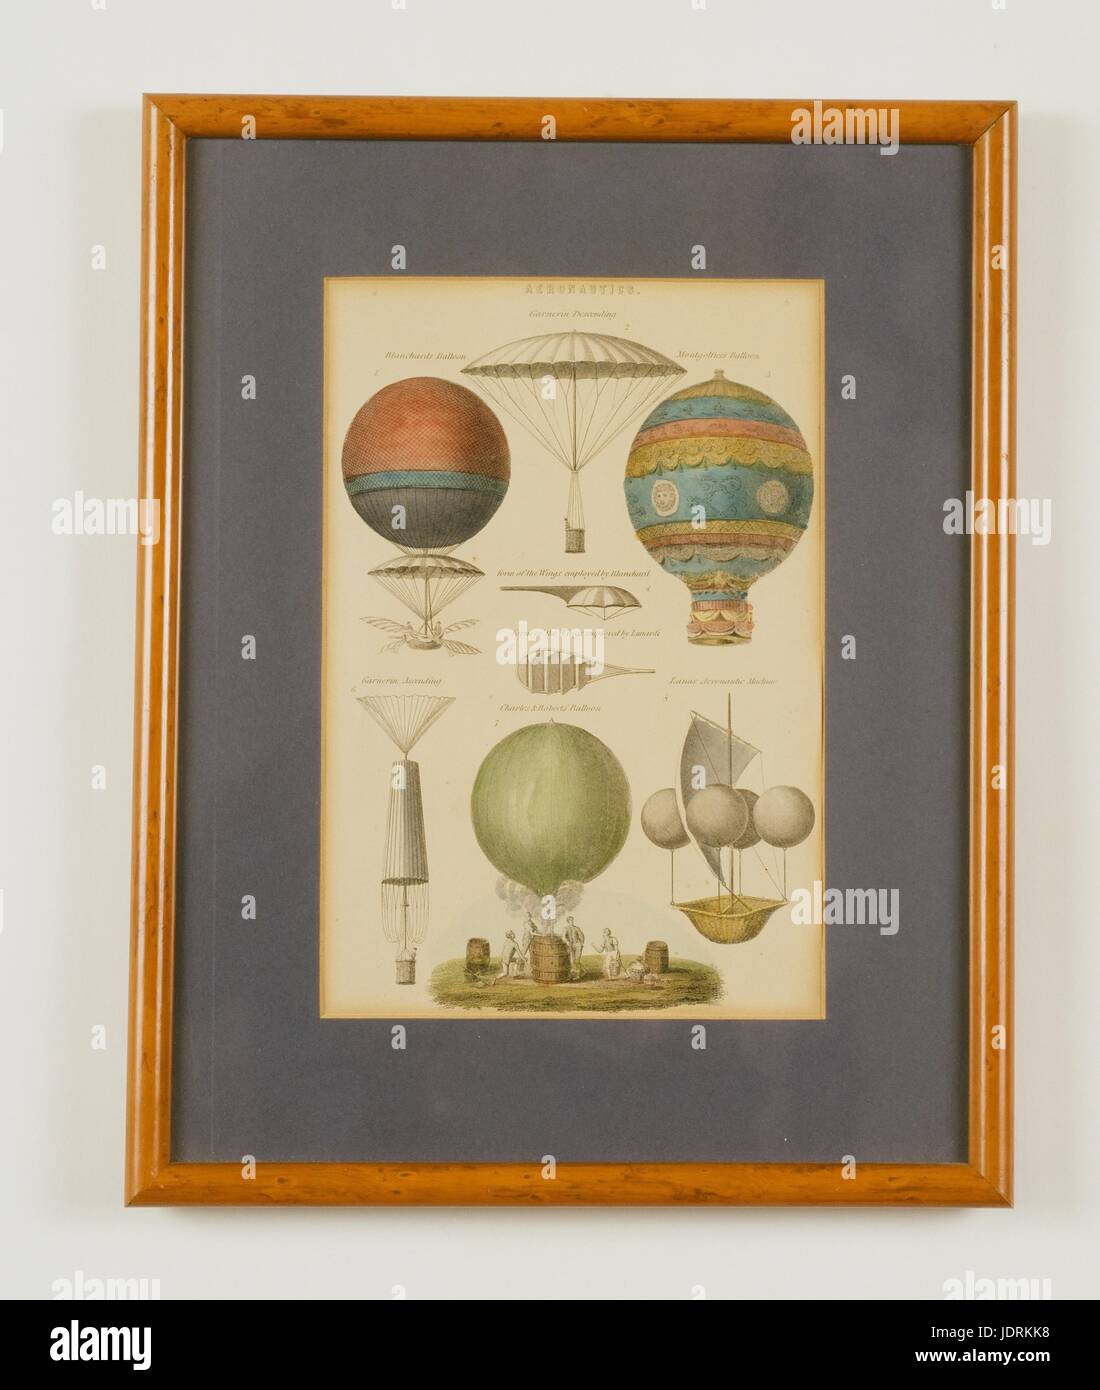 English School of Painting  Aeronautics  Framed lithograph  (35 x 27 cm)  Muller-Quênot Collection     Examples of different aerostatic experiments with:  - Blanchard's balloon;  - Garnerin's parachute;  - Montgolfier brothers' Balloon;  - Form of Wings employed by Blanchard;  - Form of Wings employed by Lunardi;  - Garnerin Ascending;  - Charles and Robert's balloon;  - Lana's Aeronautic Machine. Stock Photo